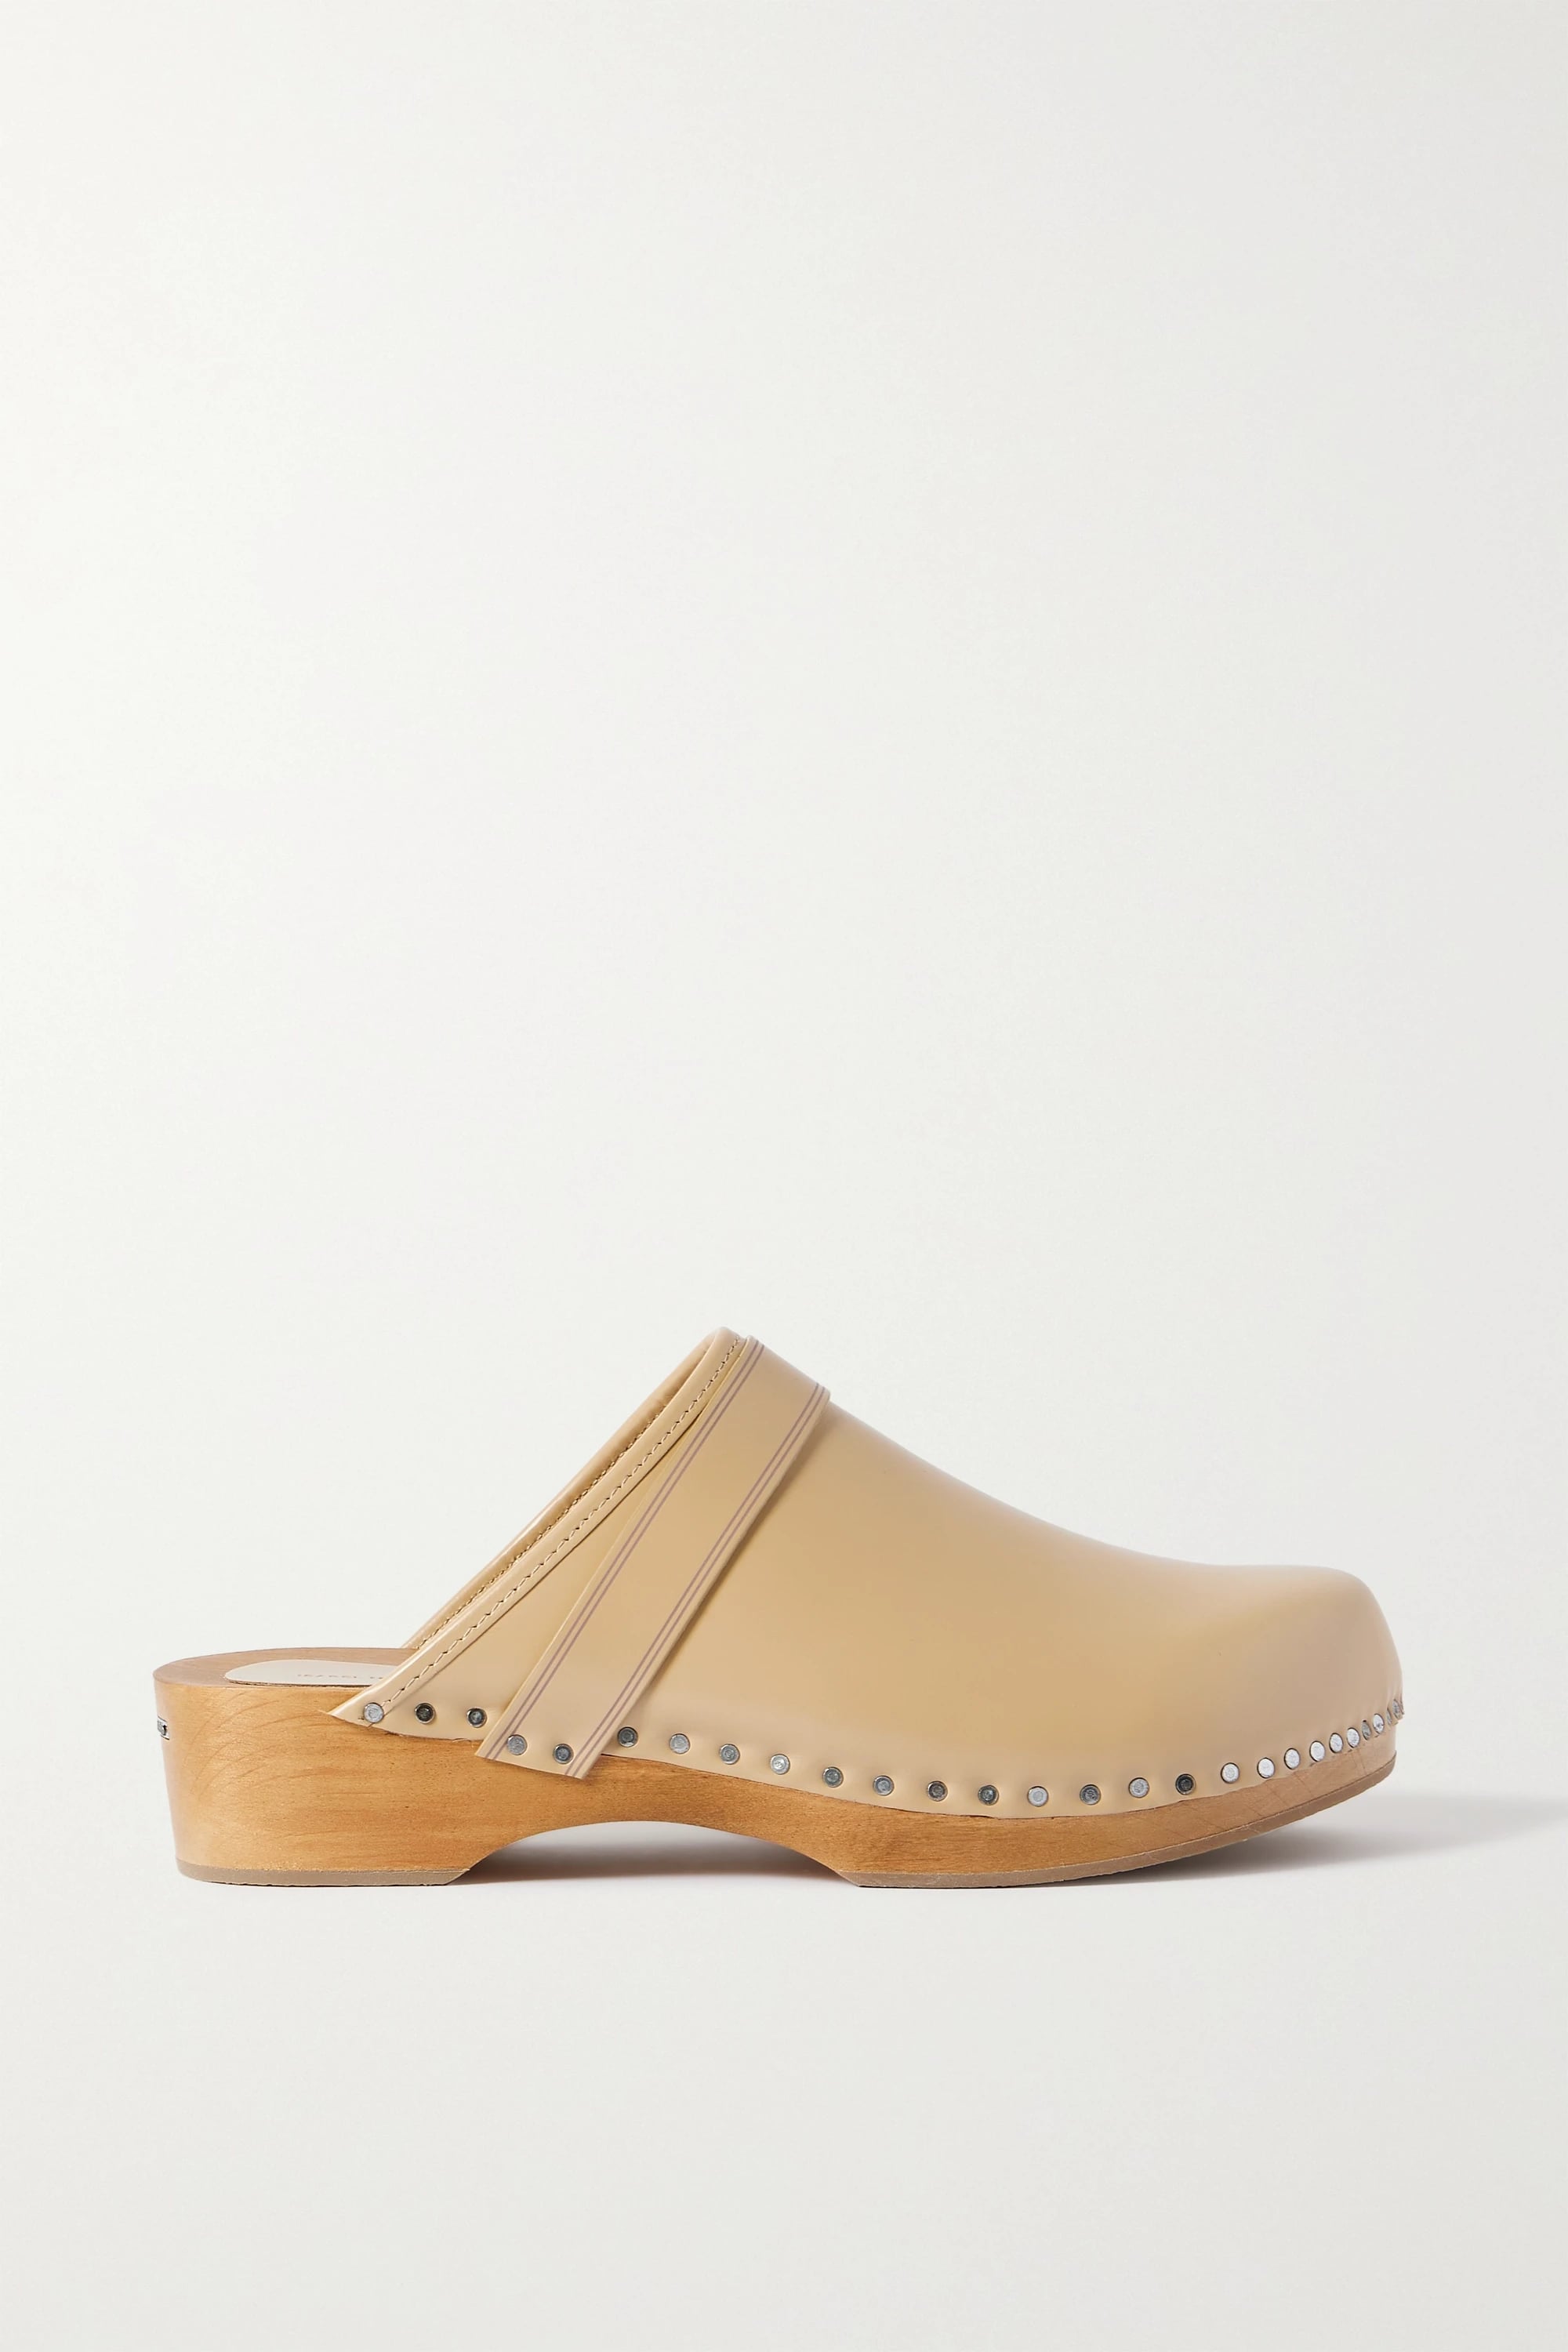 Isabel Marant Thalie Studded Leather Clogs | Invest in These 8 